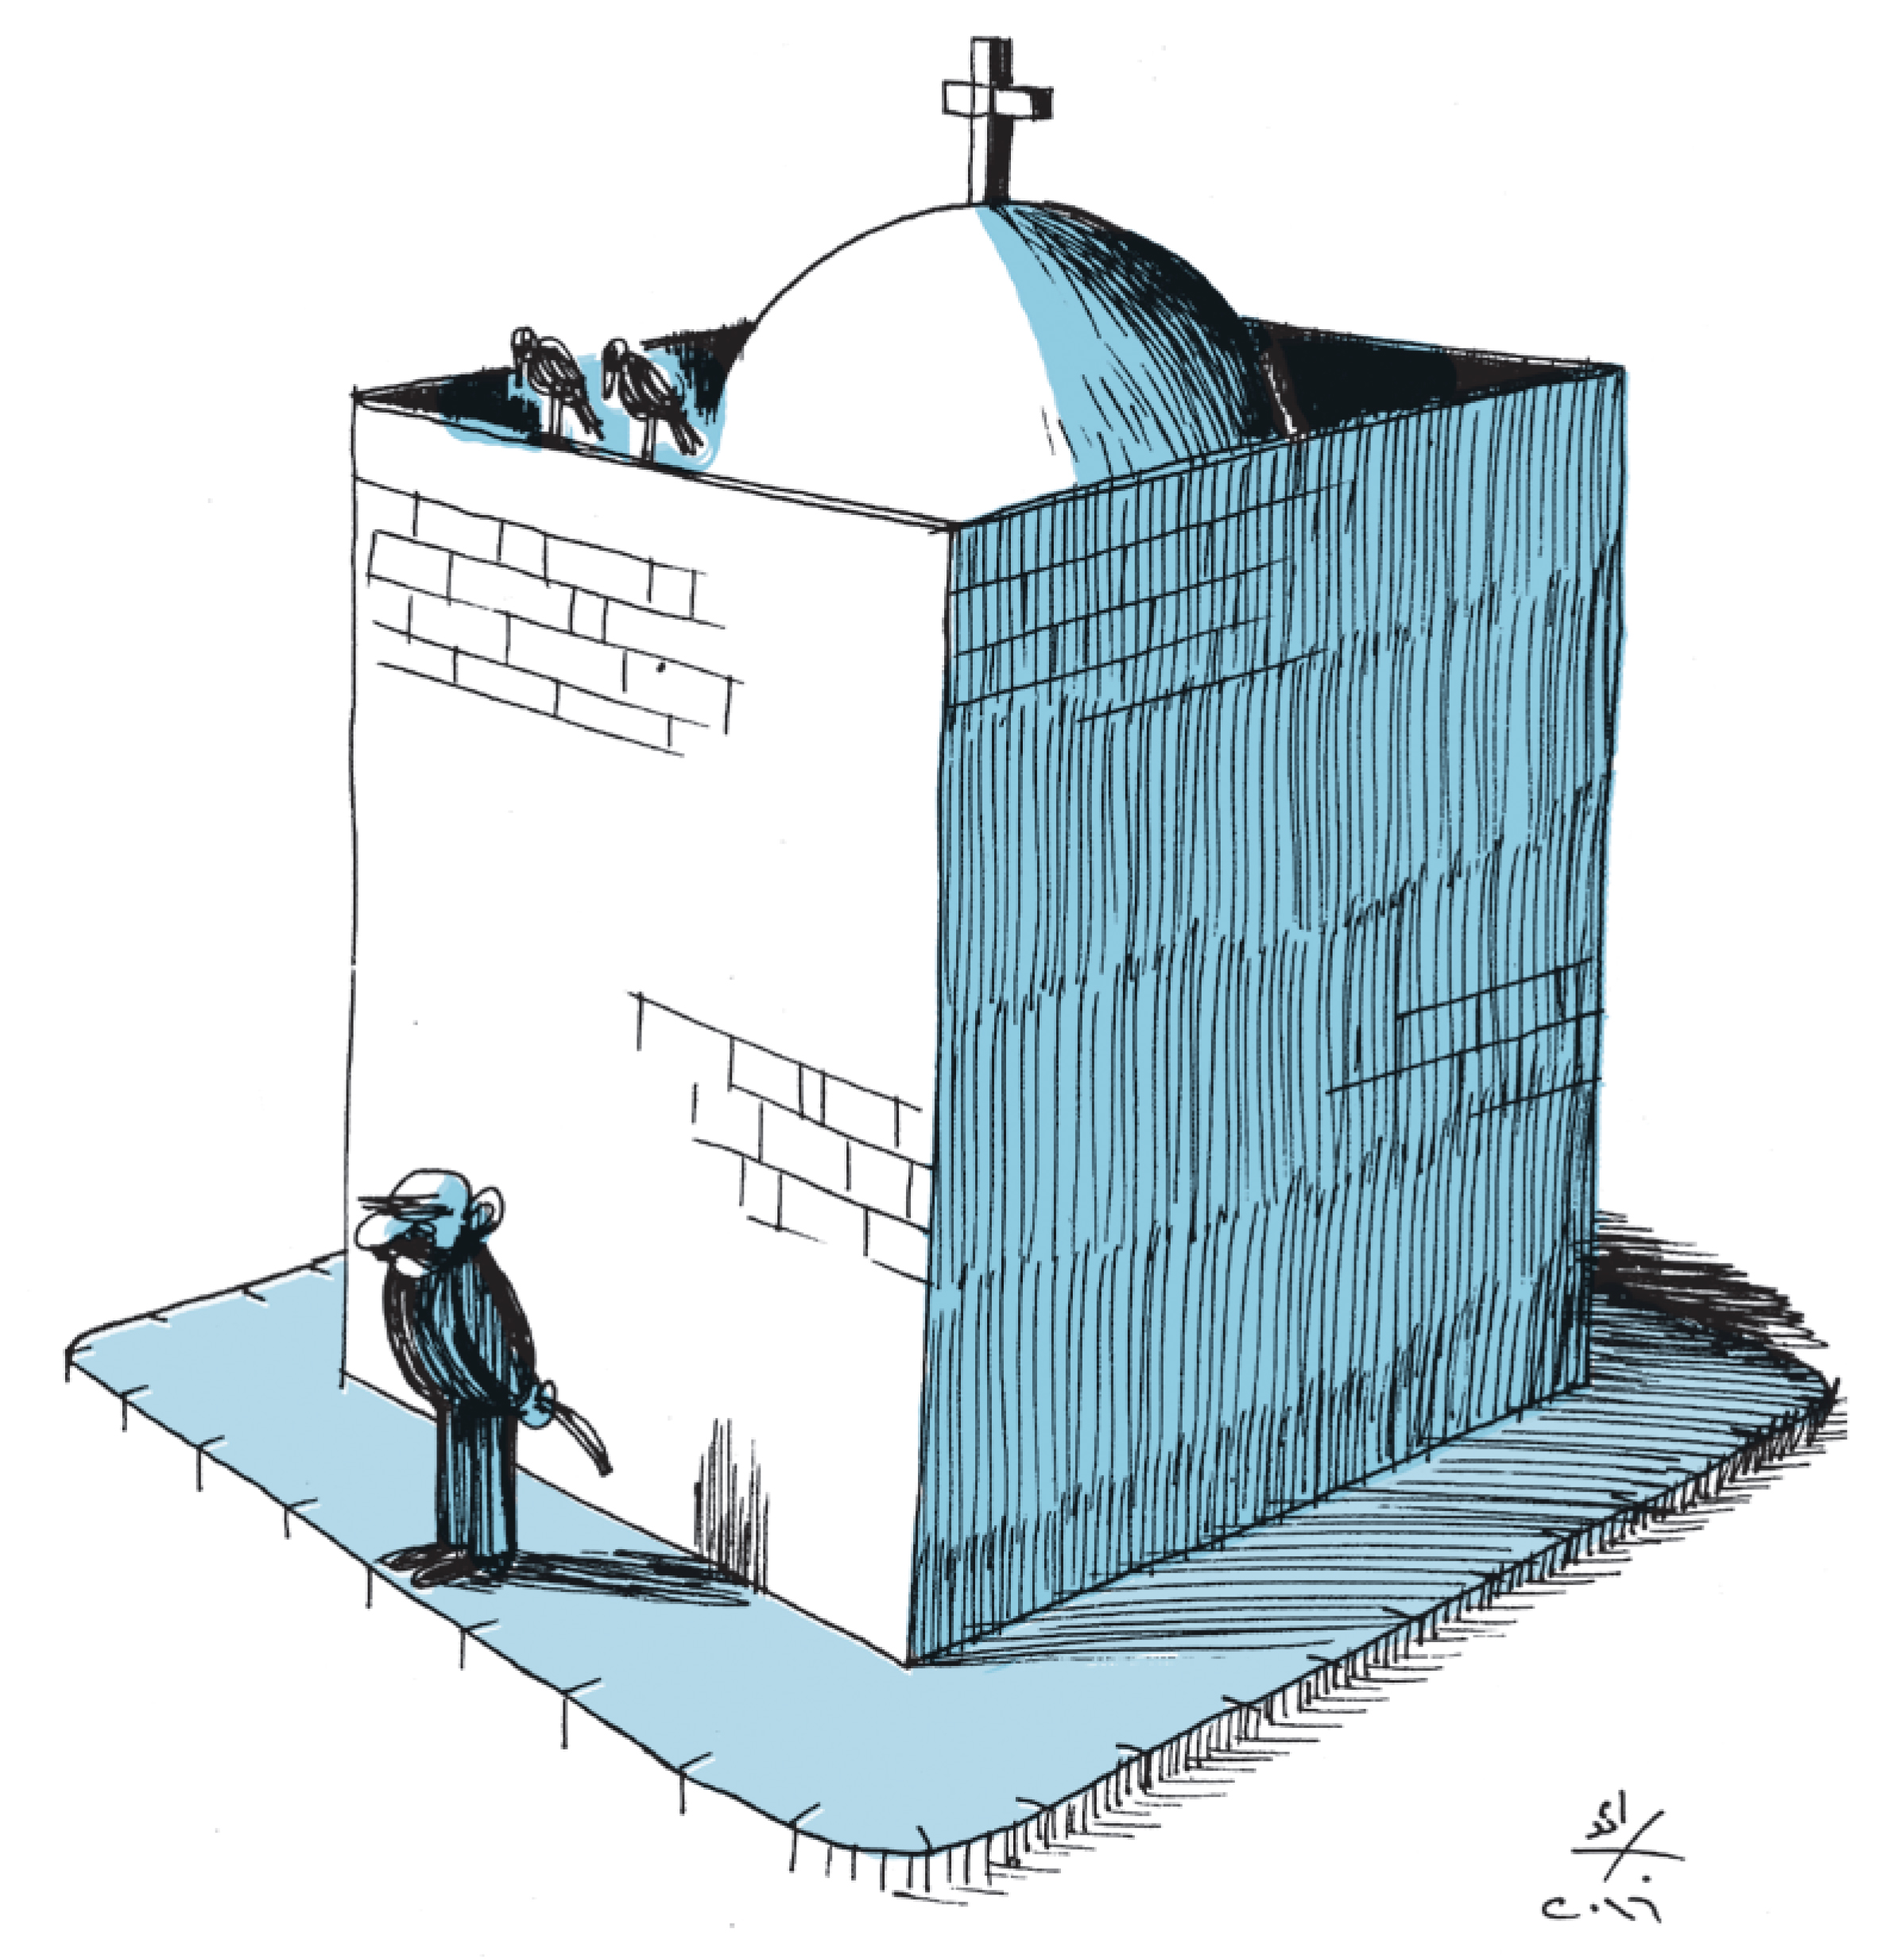 Churches in Egypt: Codifying Discrimination and Sectarianism